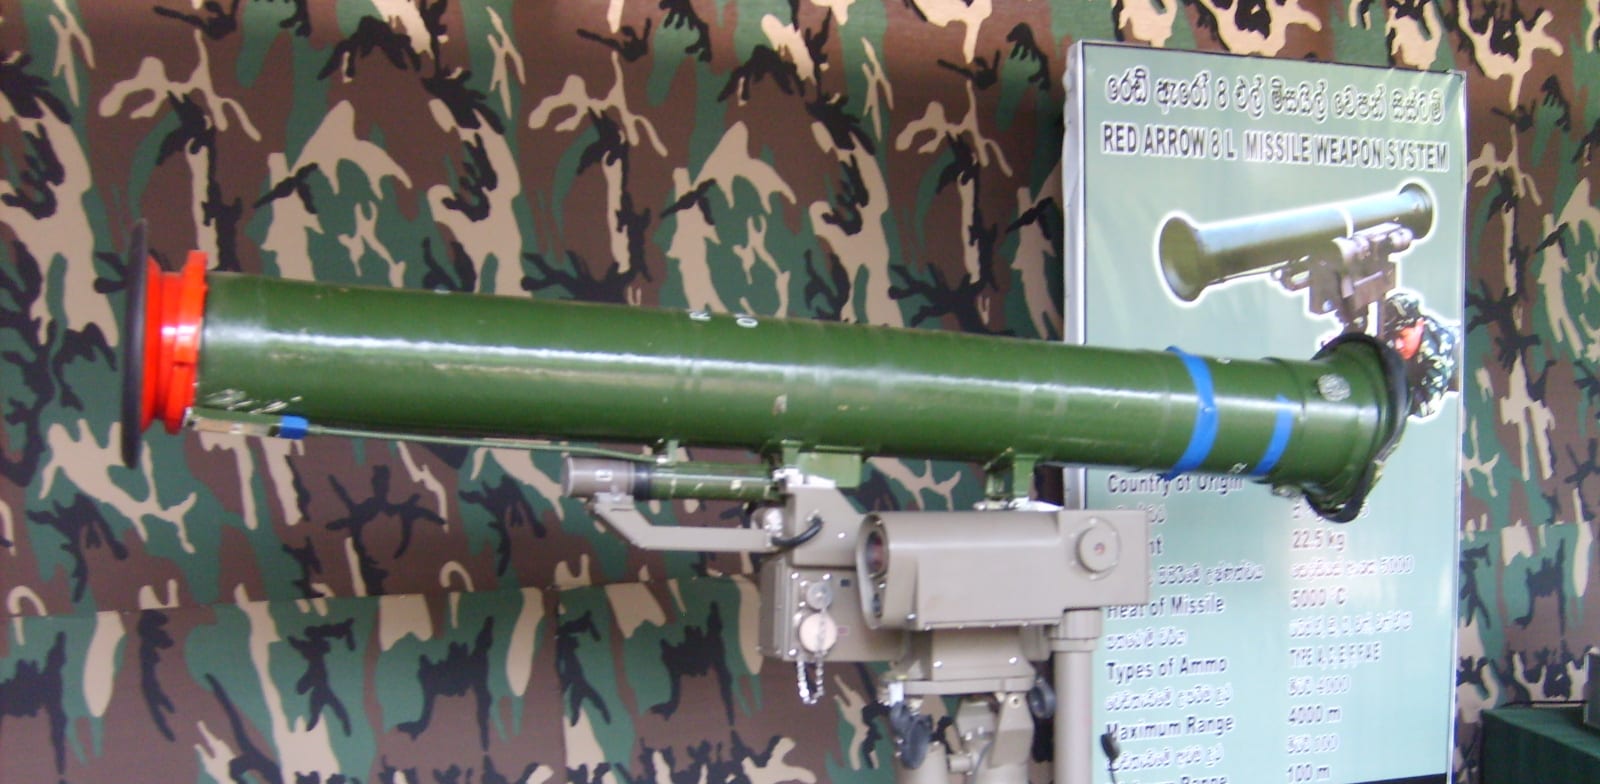 Newly uncovered: The Chinese anti-tank missile utilized by Hamas against the IDF